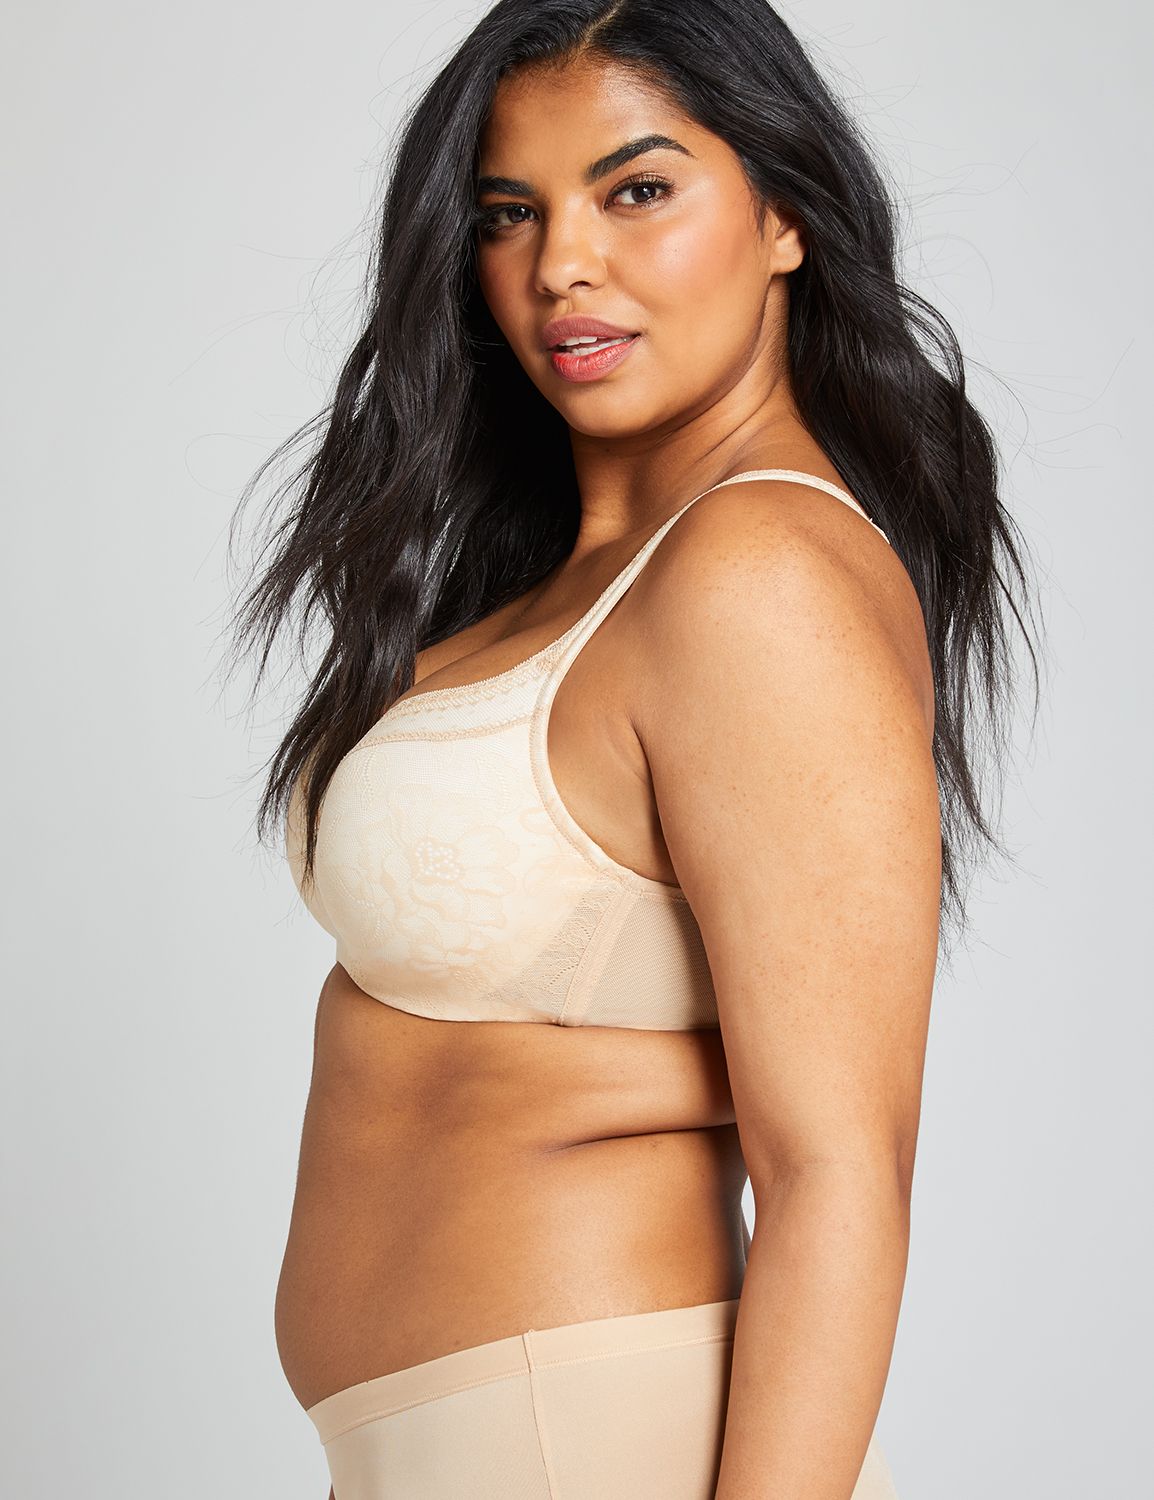 Cacique Invisible Lace Backsmoother Lightly Lined Balconette Bra Size 44D -  $29 - From Sandi